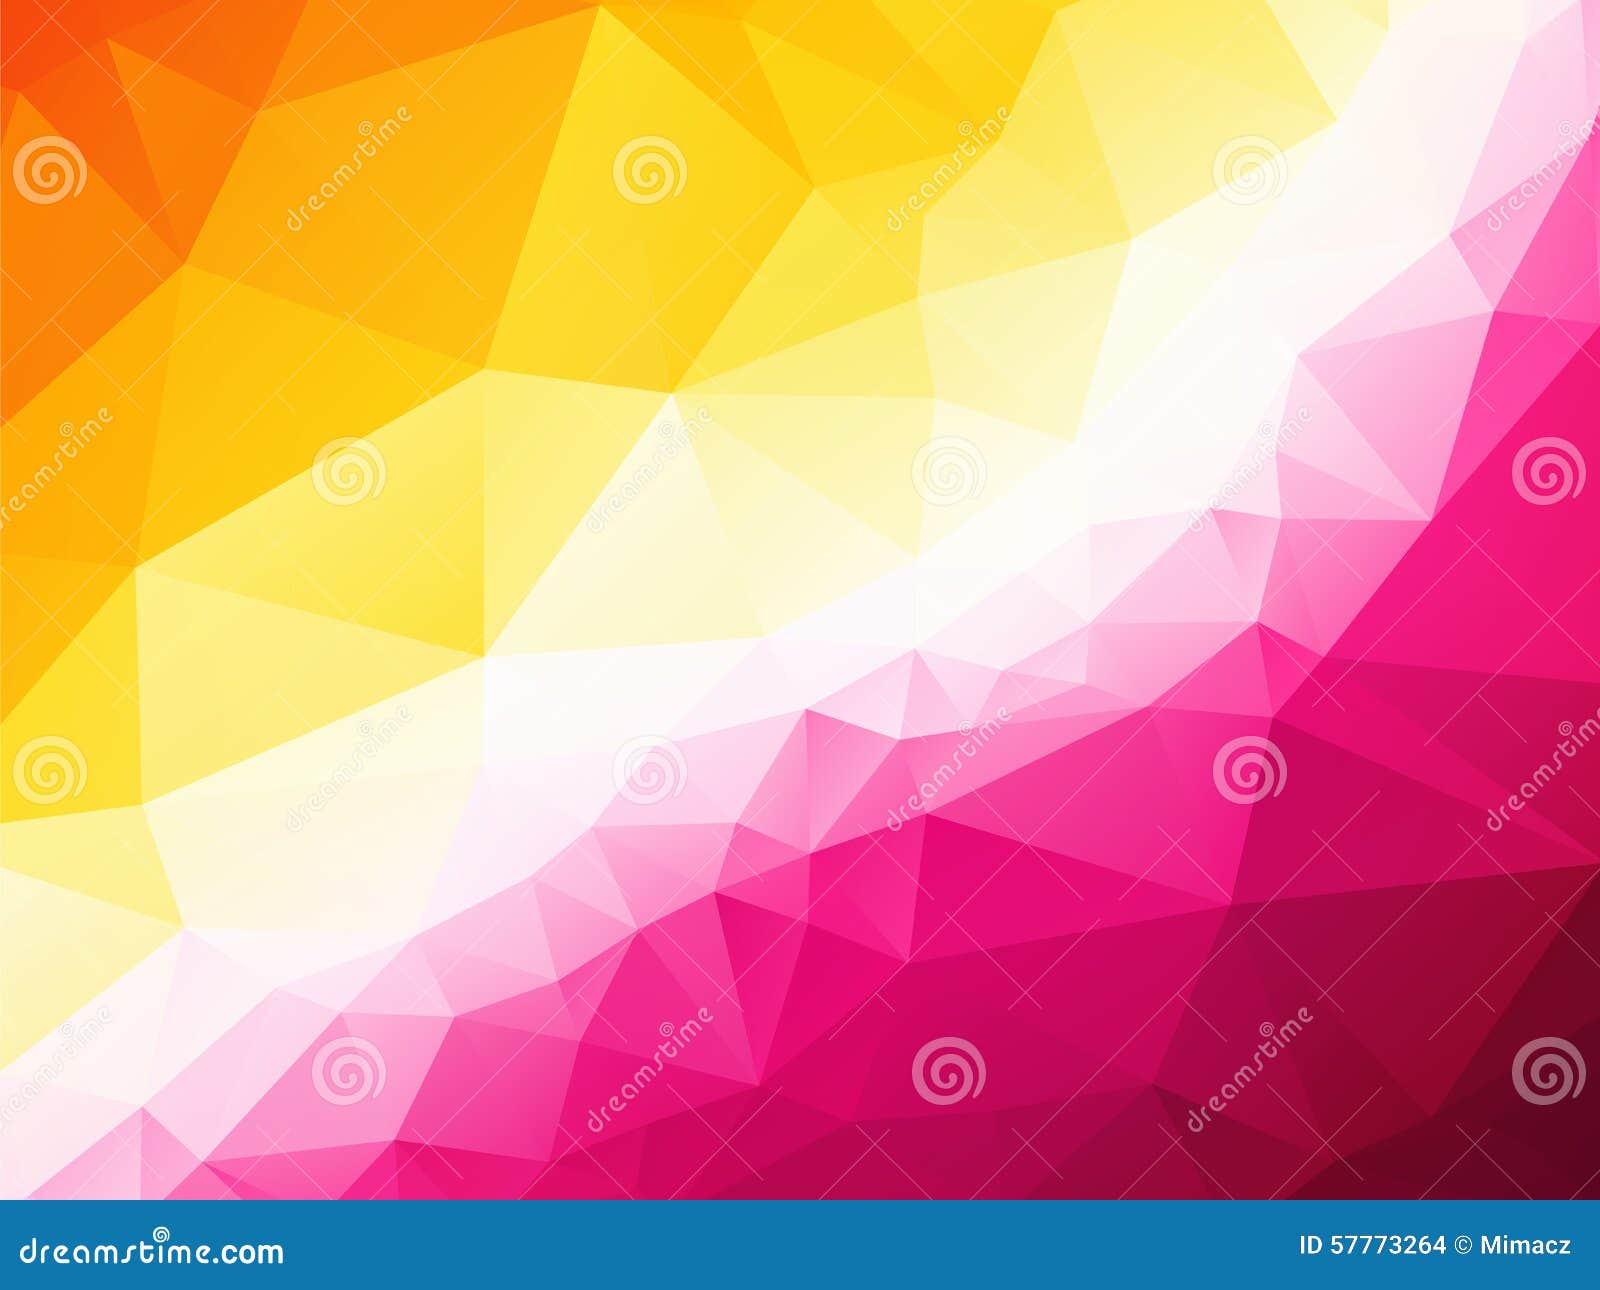 Pretty Pink Yellow Background Stock Vector - Illustration of mosaic, style:  57773264